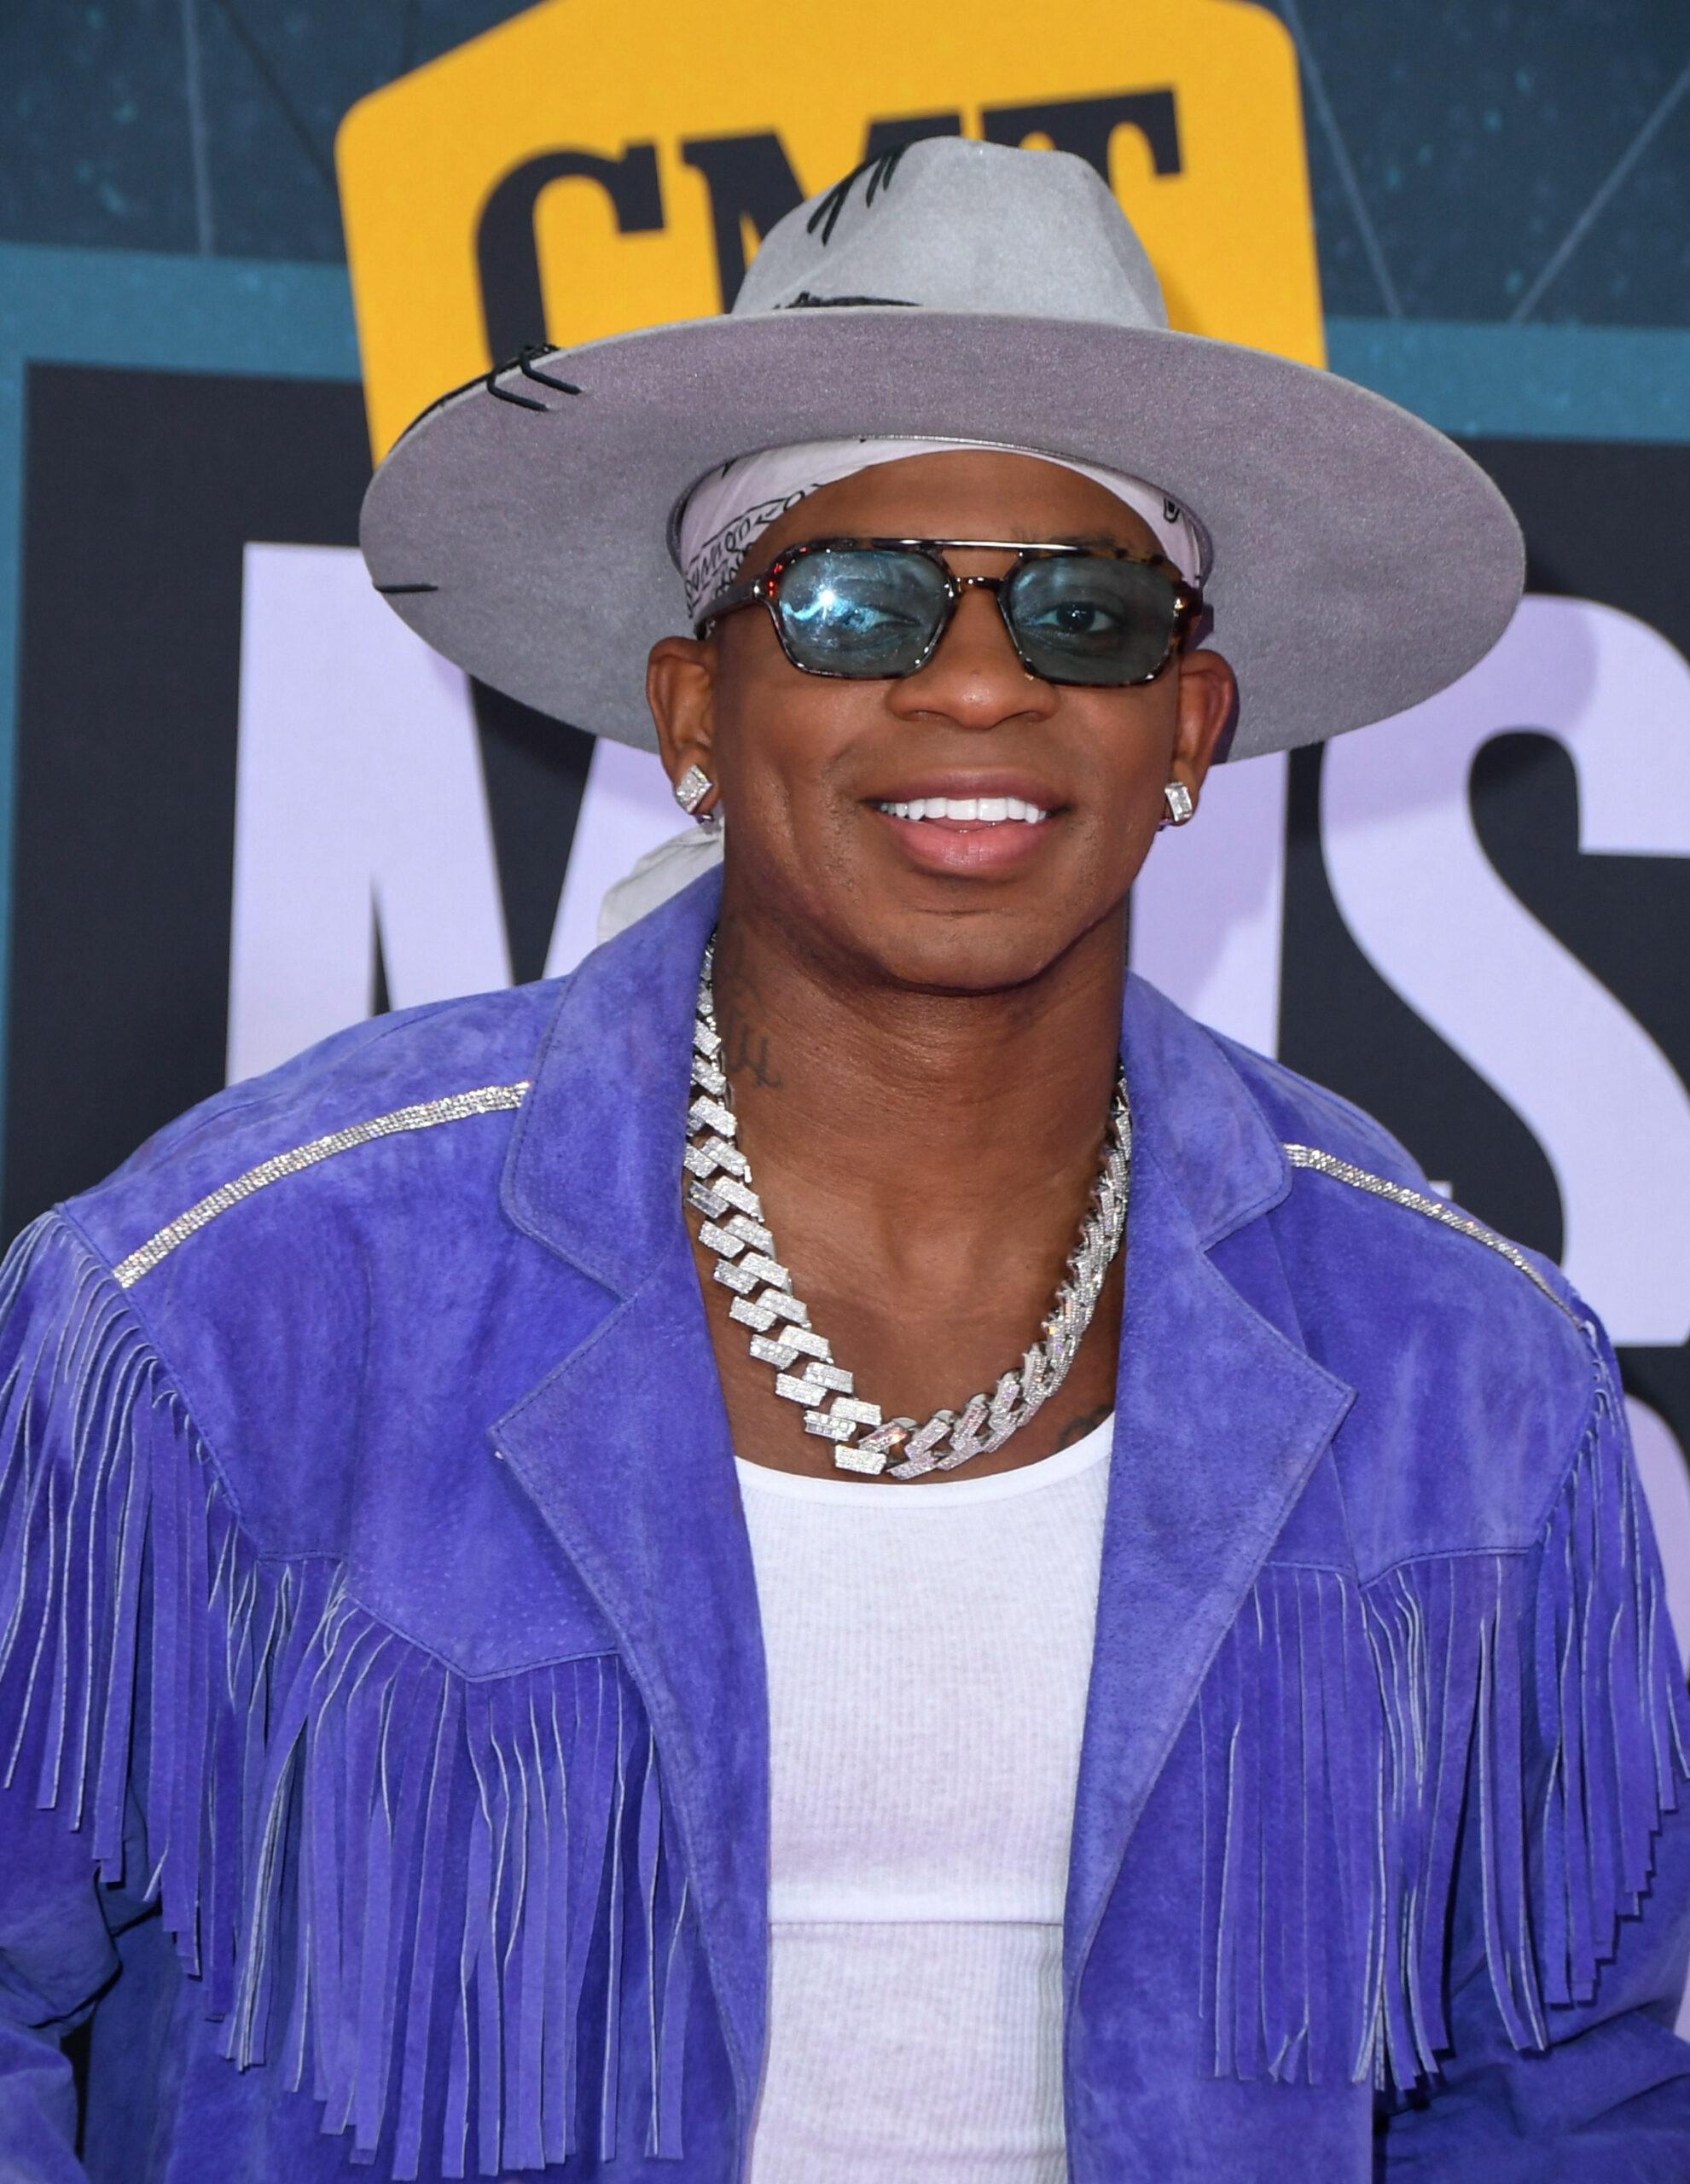 Jimmie Allen at the 2022 CMT Awards